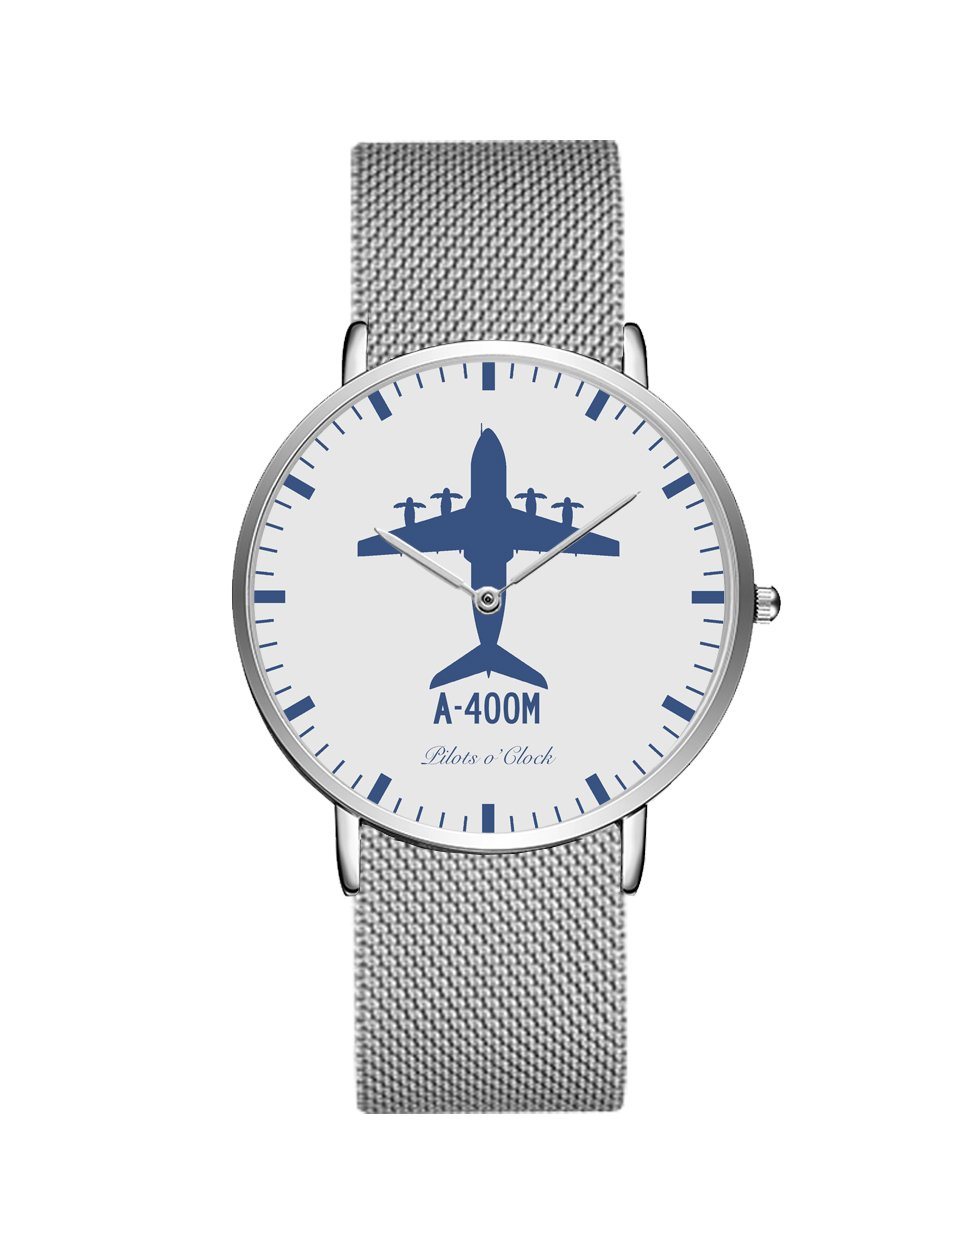 Airbus A400M Stainless Steel Strap Watches Pilot Eyes Store Silver & Silver Stainless Steel Strap 